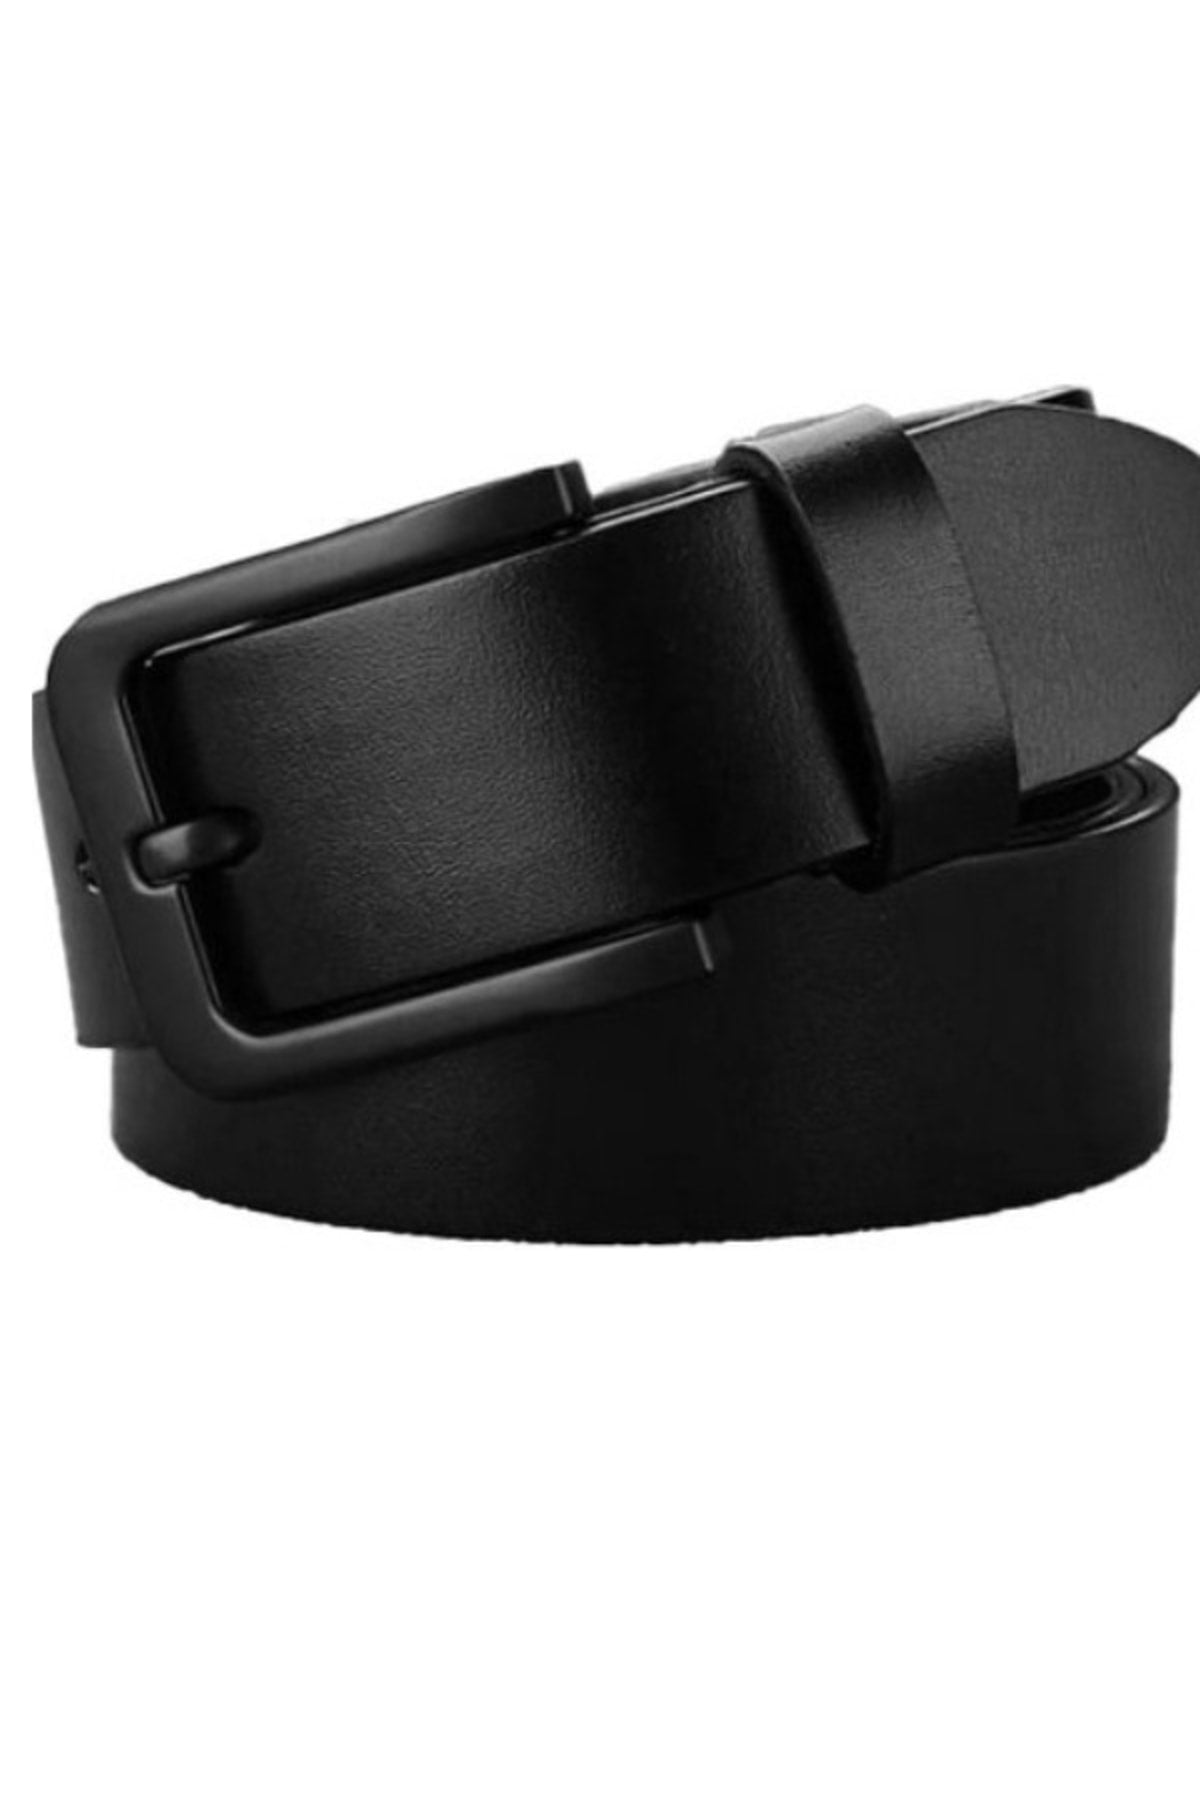 Belt Suitable For Men's Leather Jeans And Canvas Trousers